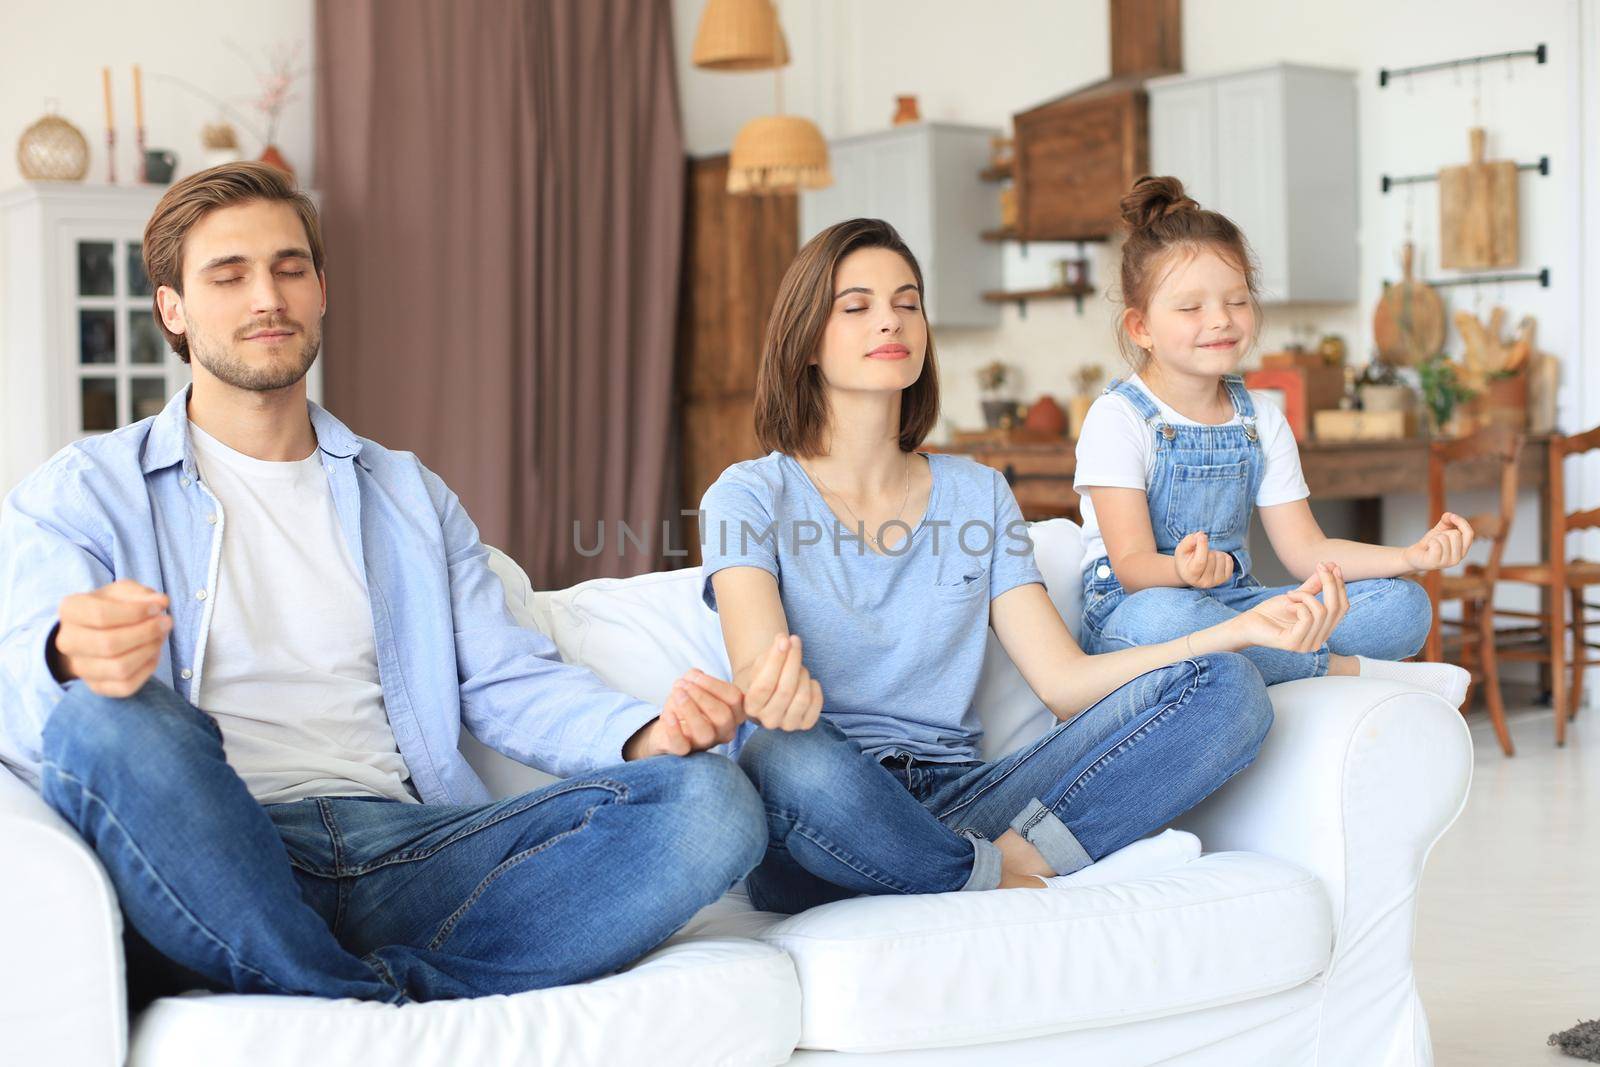 Calm young family with little daughter sit on couch practice yoga together, happy parents with small preschooler girl child rest on sofa meditate relieve negative emotions on weekend at home